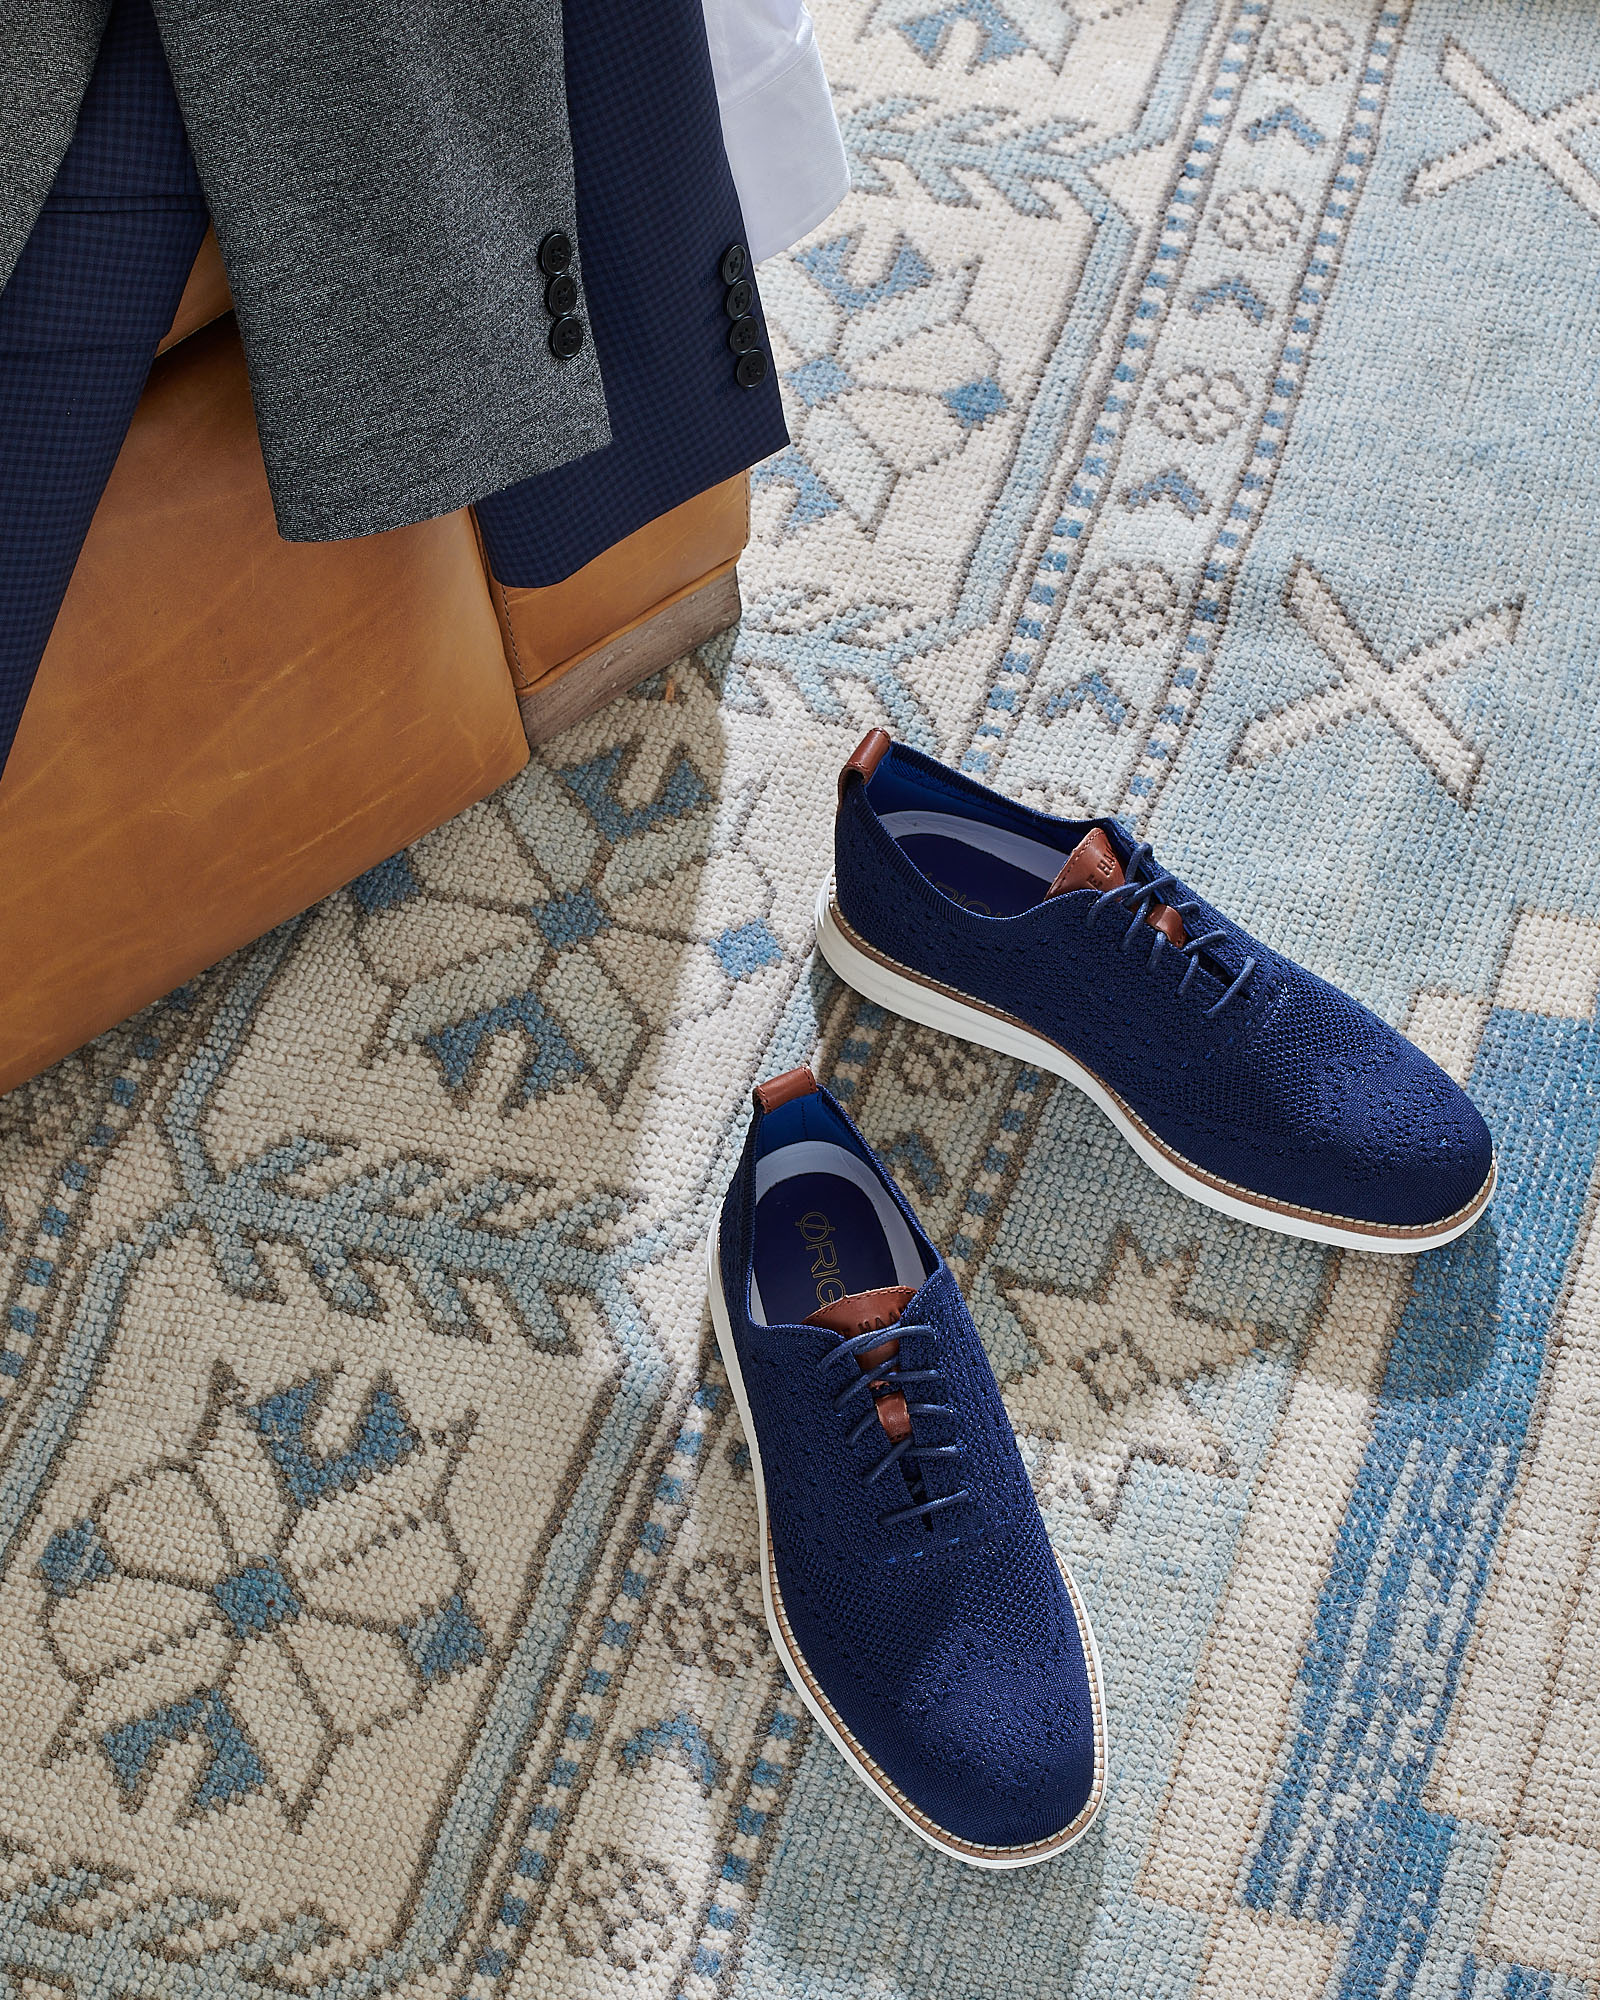 Blue sneakers on light blue rug by  Alison Gootee Photography